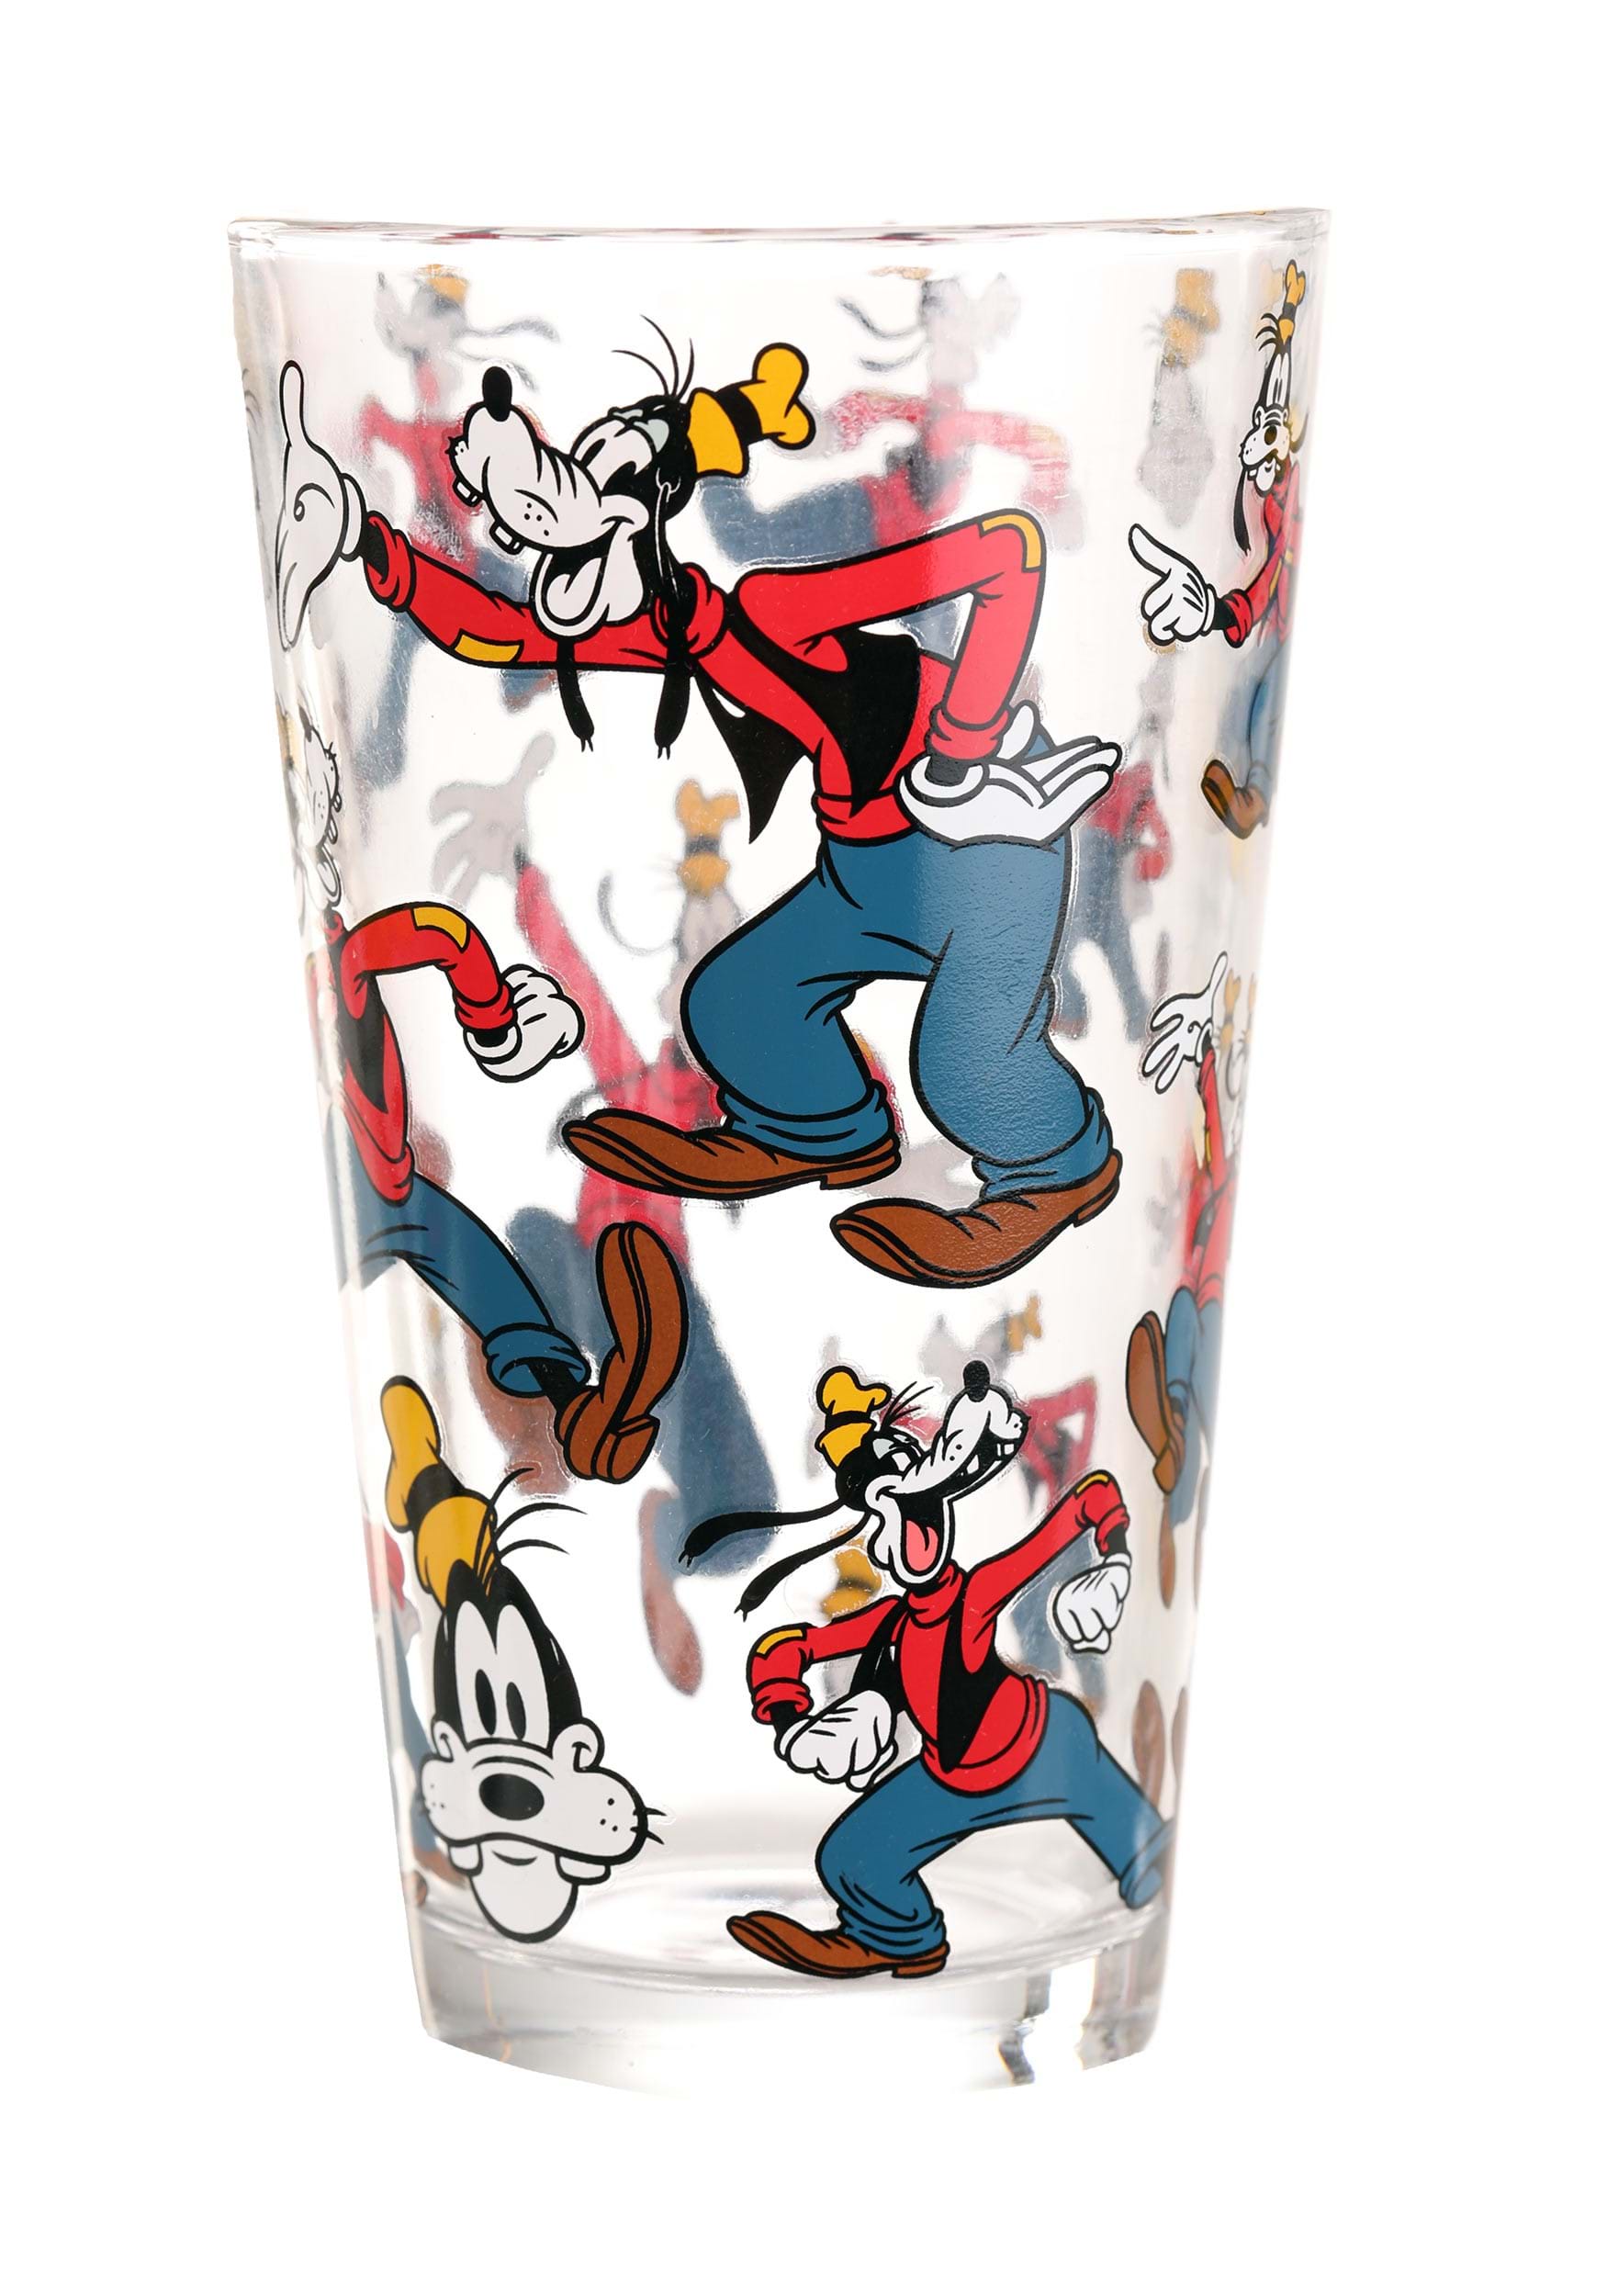 https://images.fun.com/products/87645/2-1-251830/disney-mickey-and-friends-tossed-poses-s-4-tumbler-alt-1.jpg